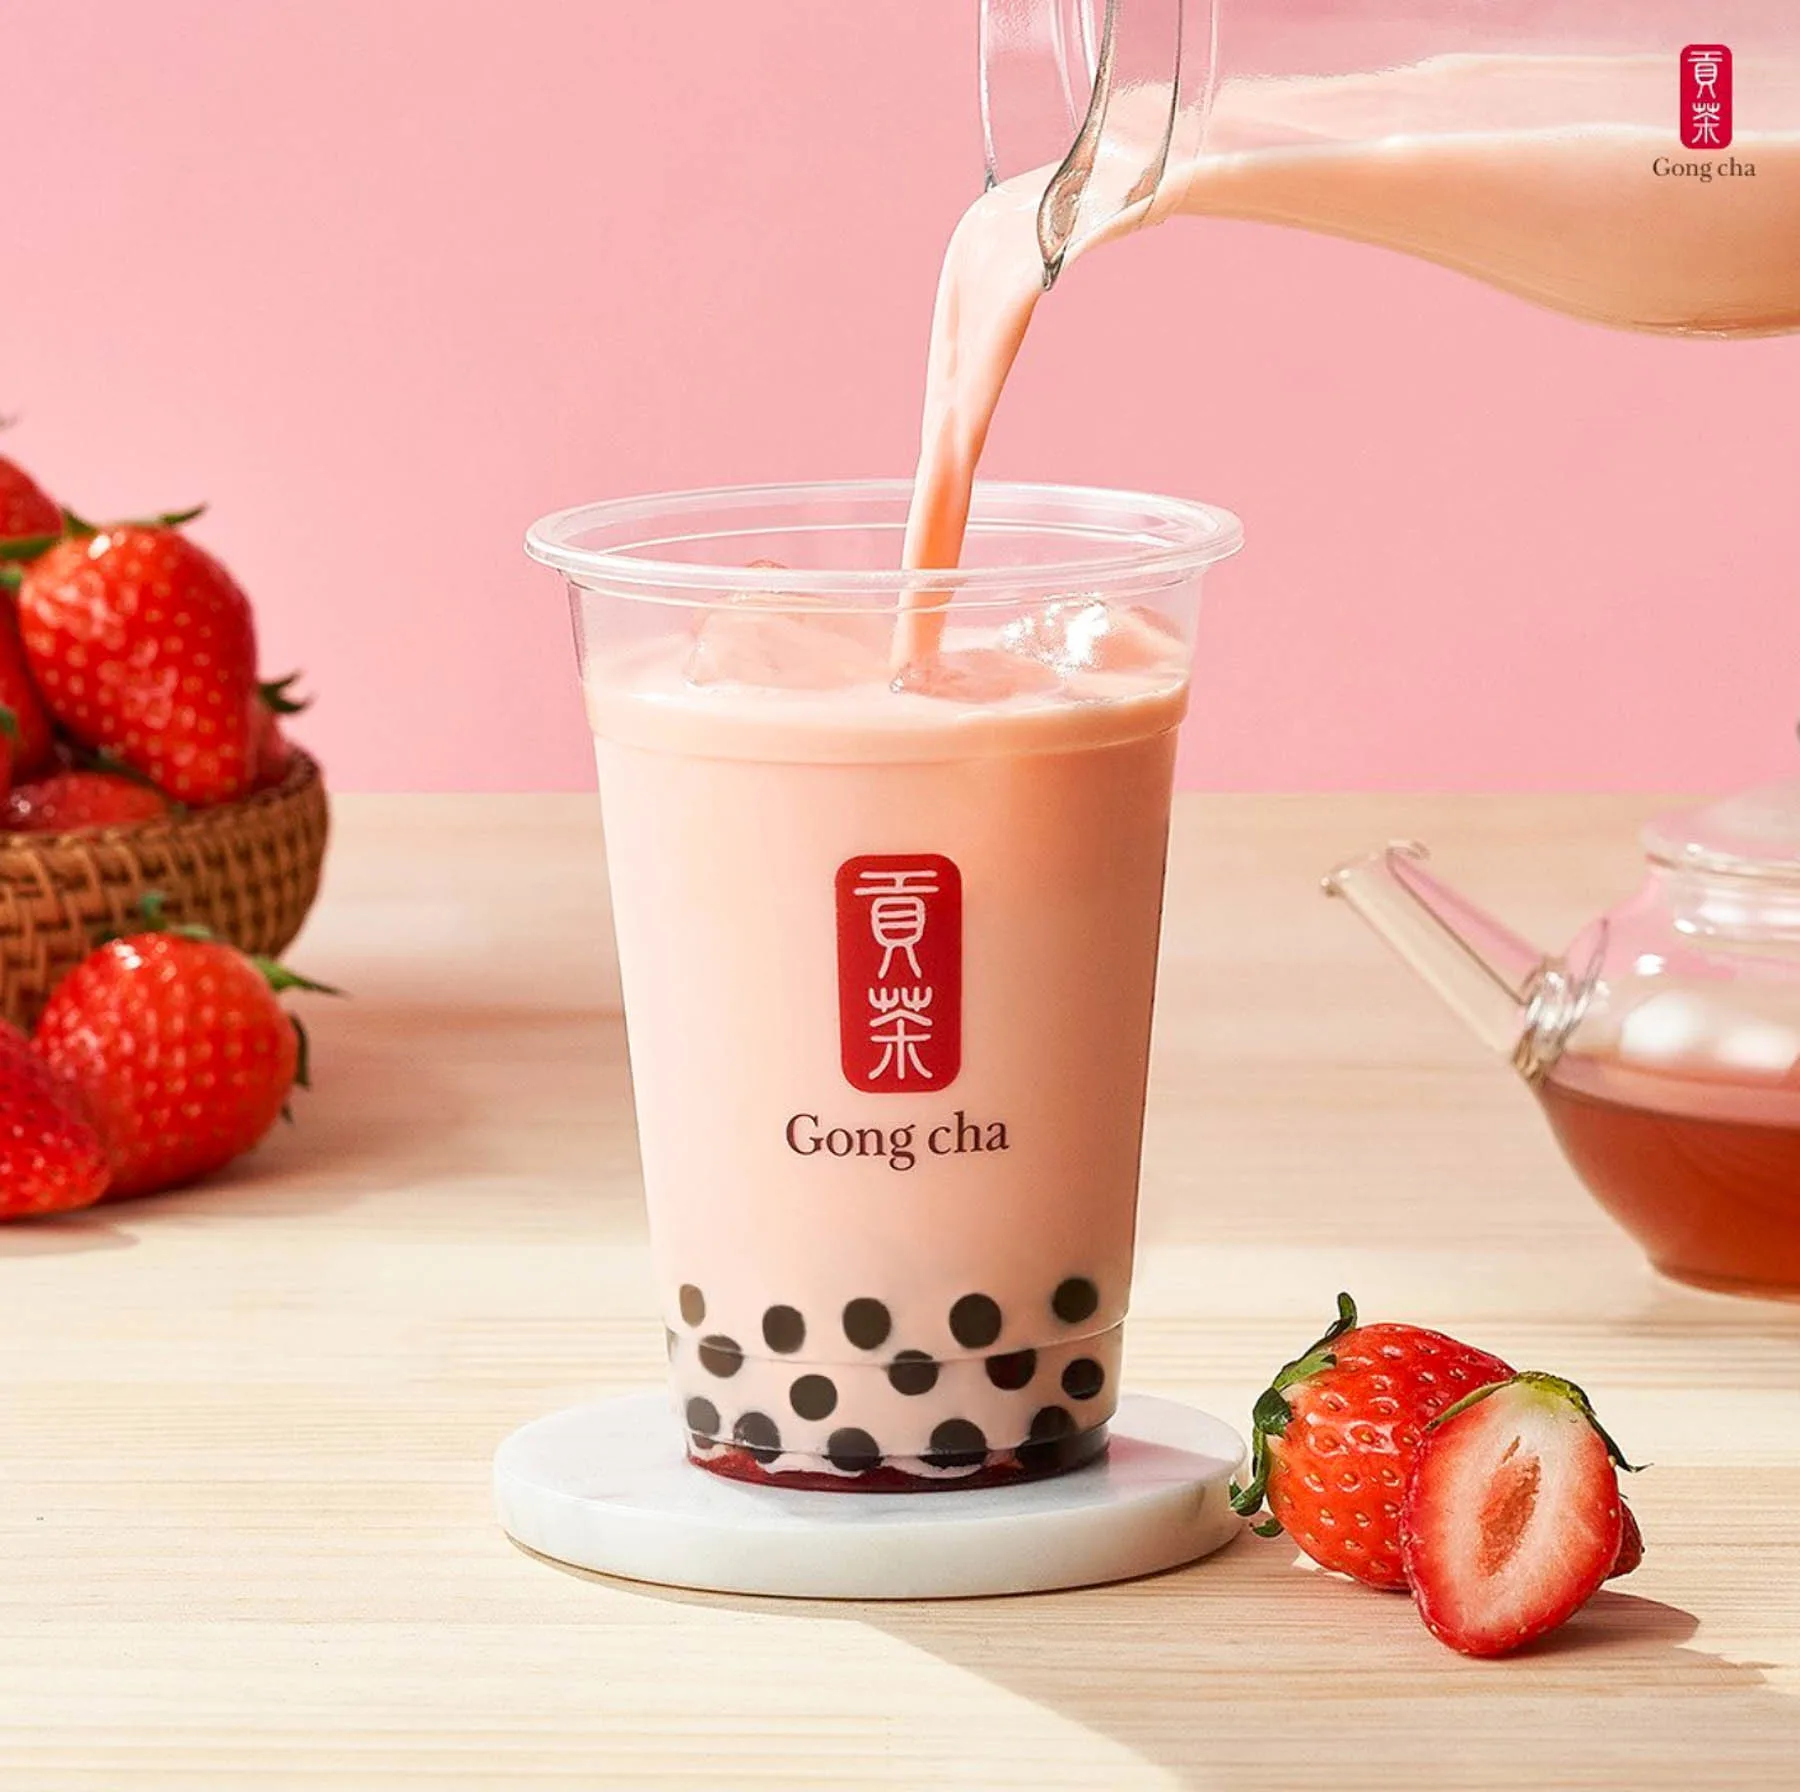 most popular bubble tea in New York City, Gong Cha